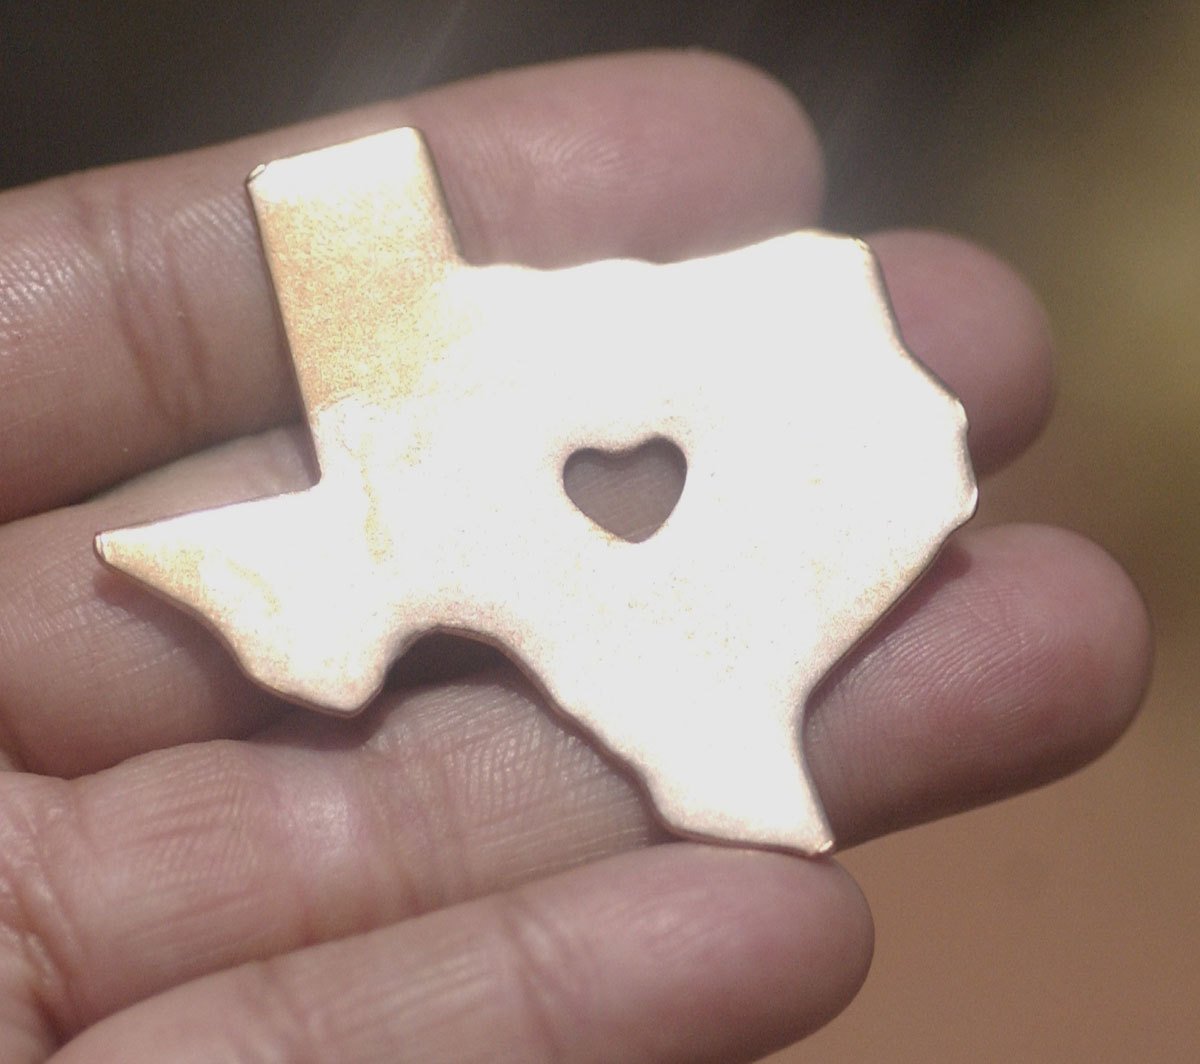 Texas State with Heart Chubby 6.6mm Cute Blanks Cutout for Metalworking Stamping Texturing Blank Variety of Metals